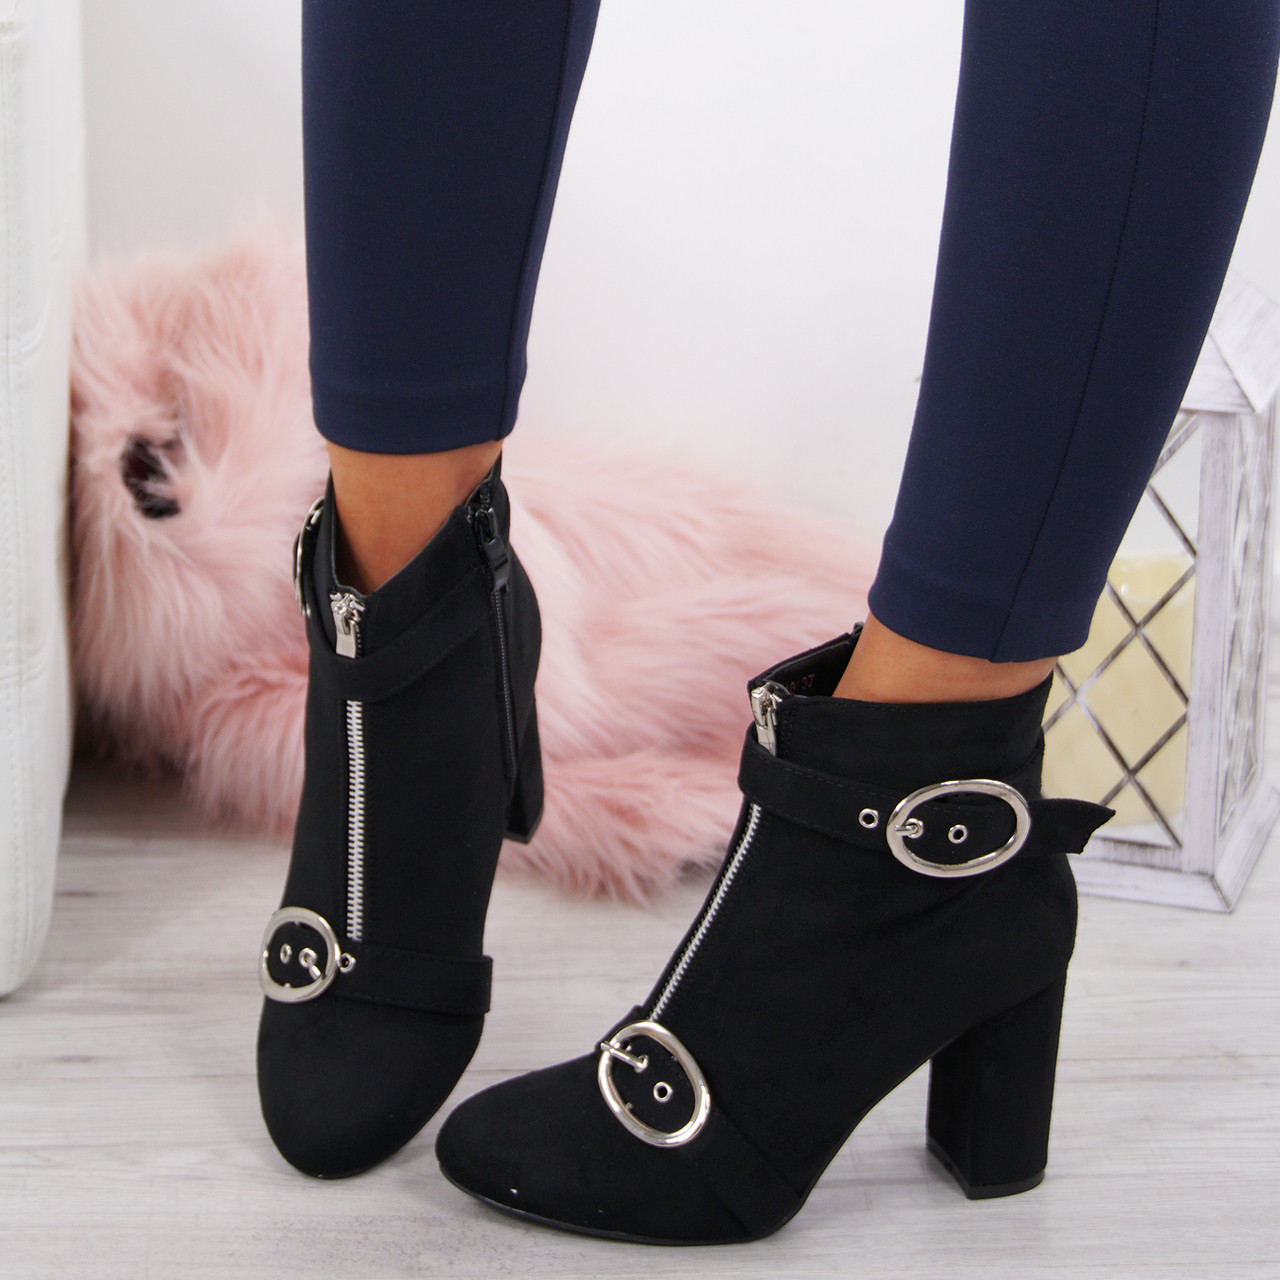 high heeled ankle boots uk